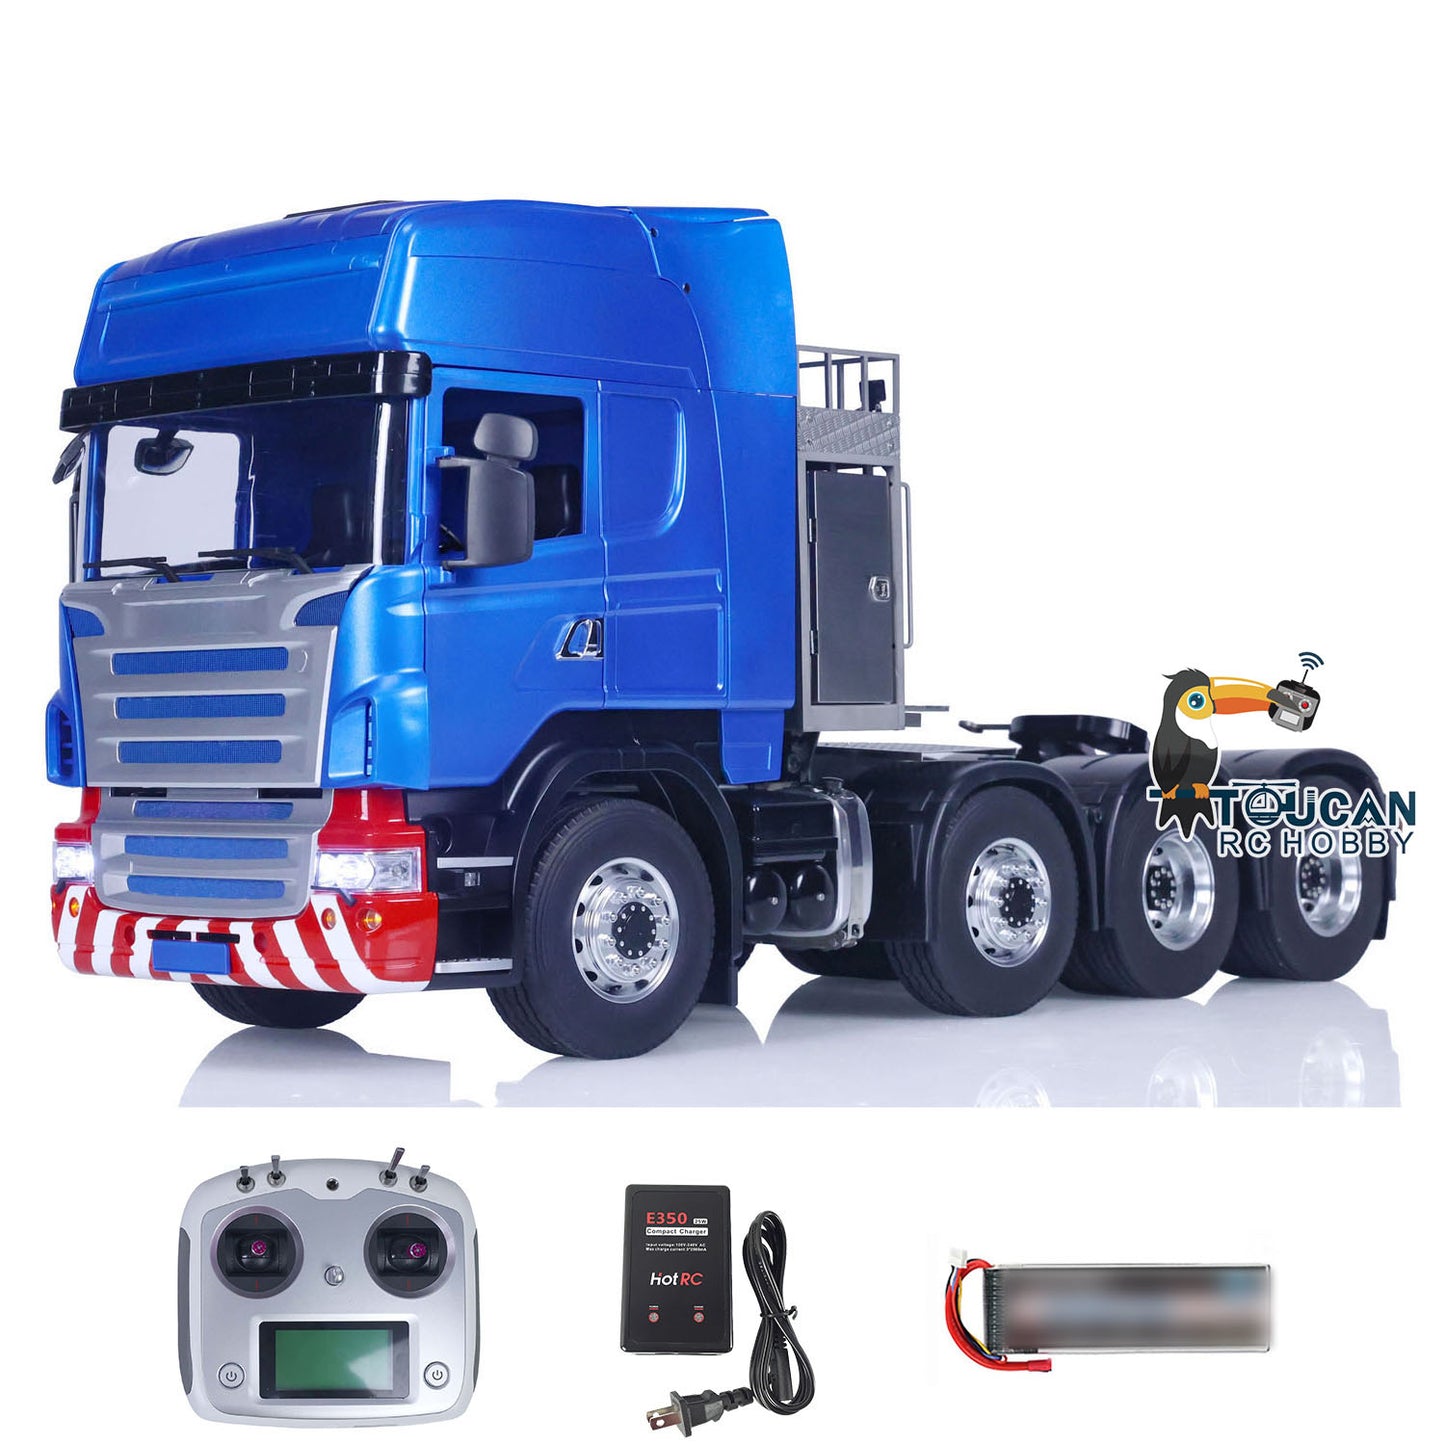 LESU 1/14 RC Tractor Truck 8x8 RTR Remote Controlled Car Hobby Model Construction Vehicle Metal Chassis Sound Lights DIY